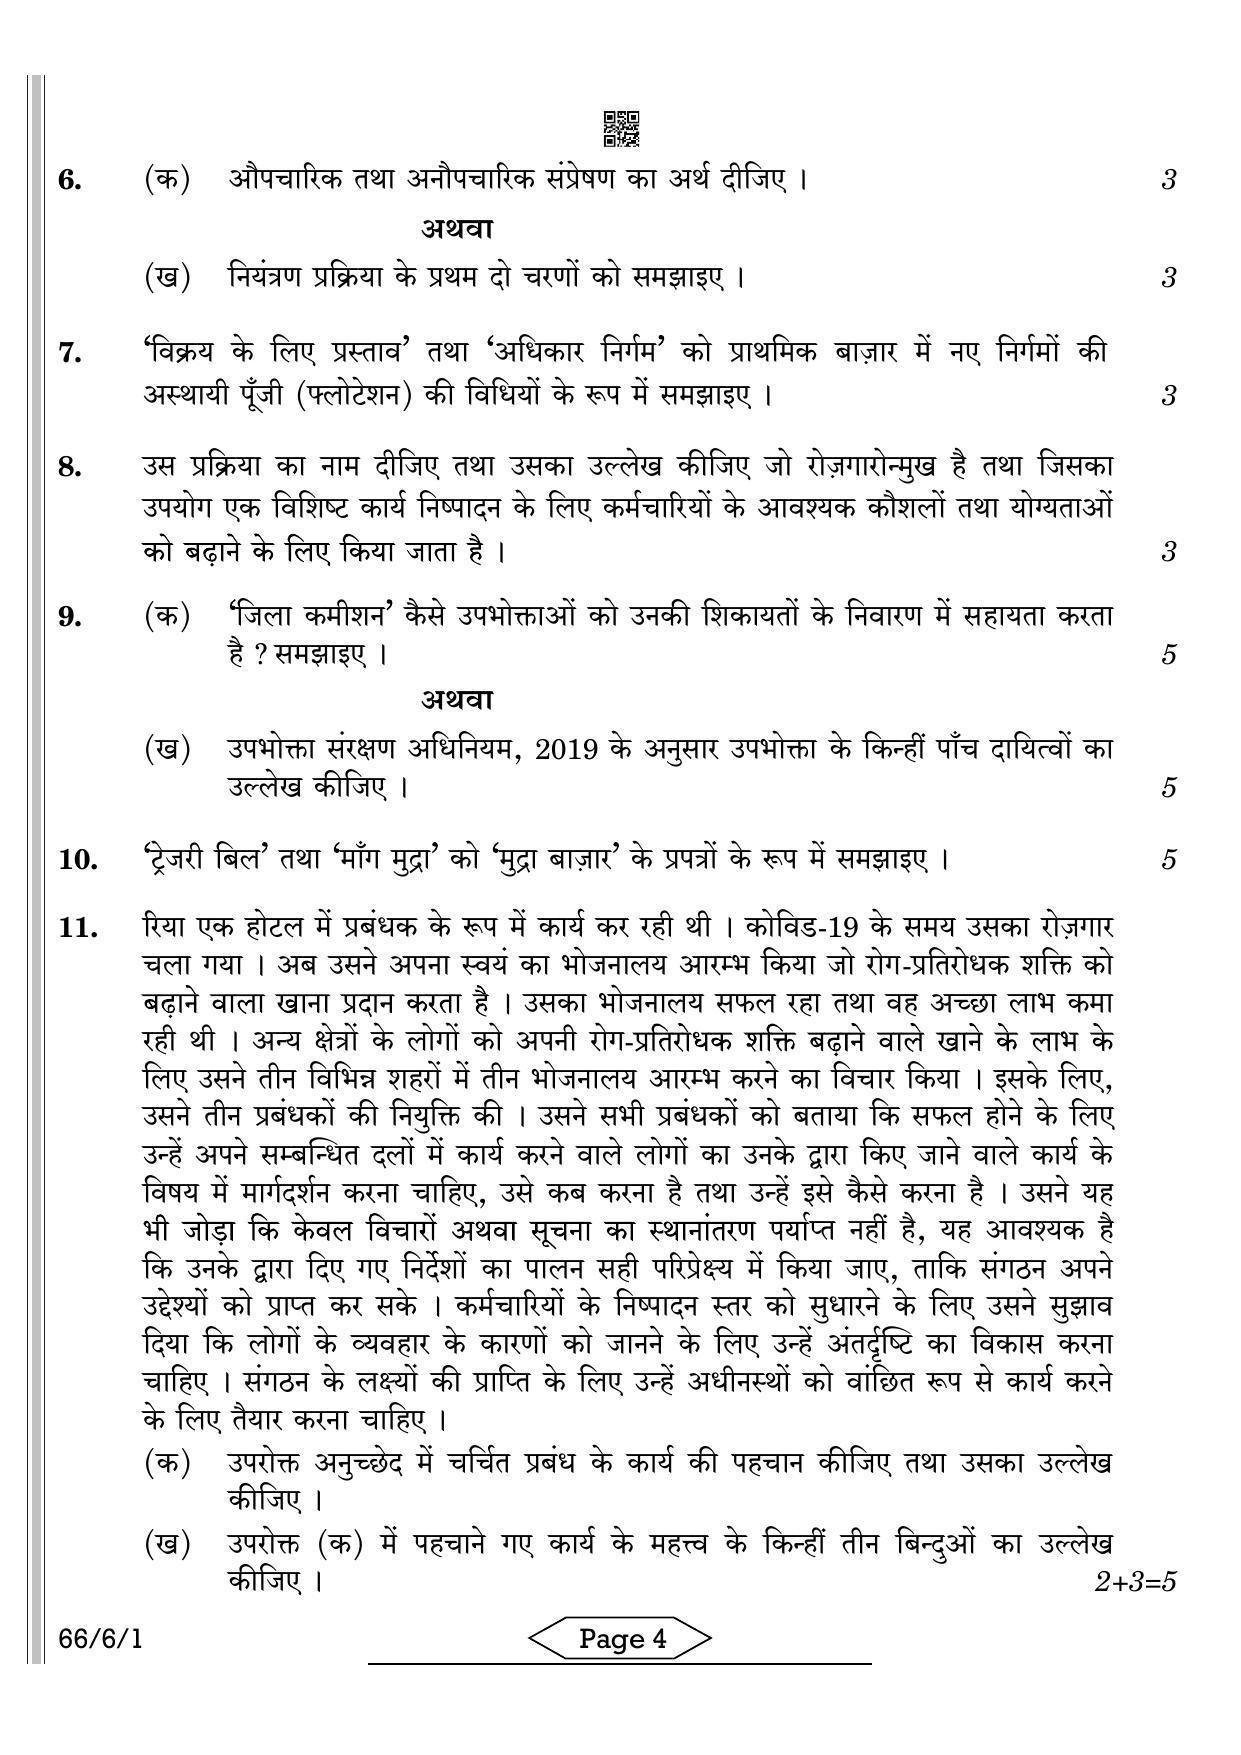 CBSE Class 12 66-6-1 BST 2022 Compartment Question Paper - Page 4